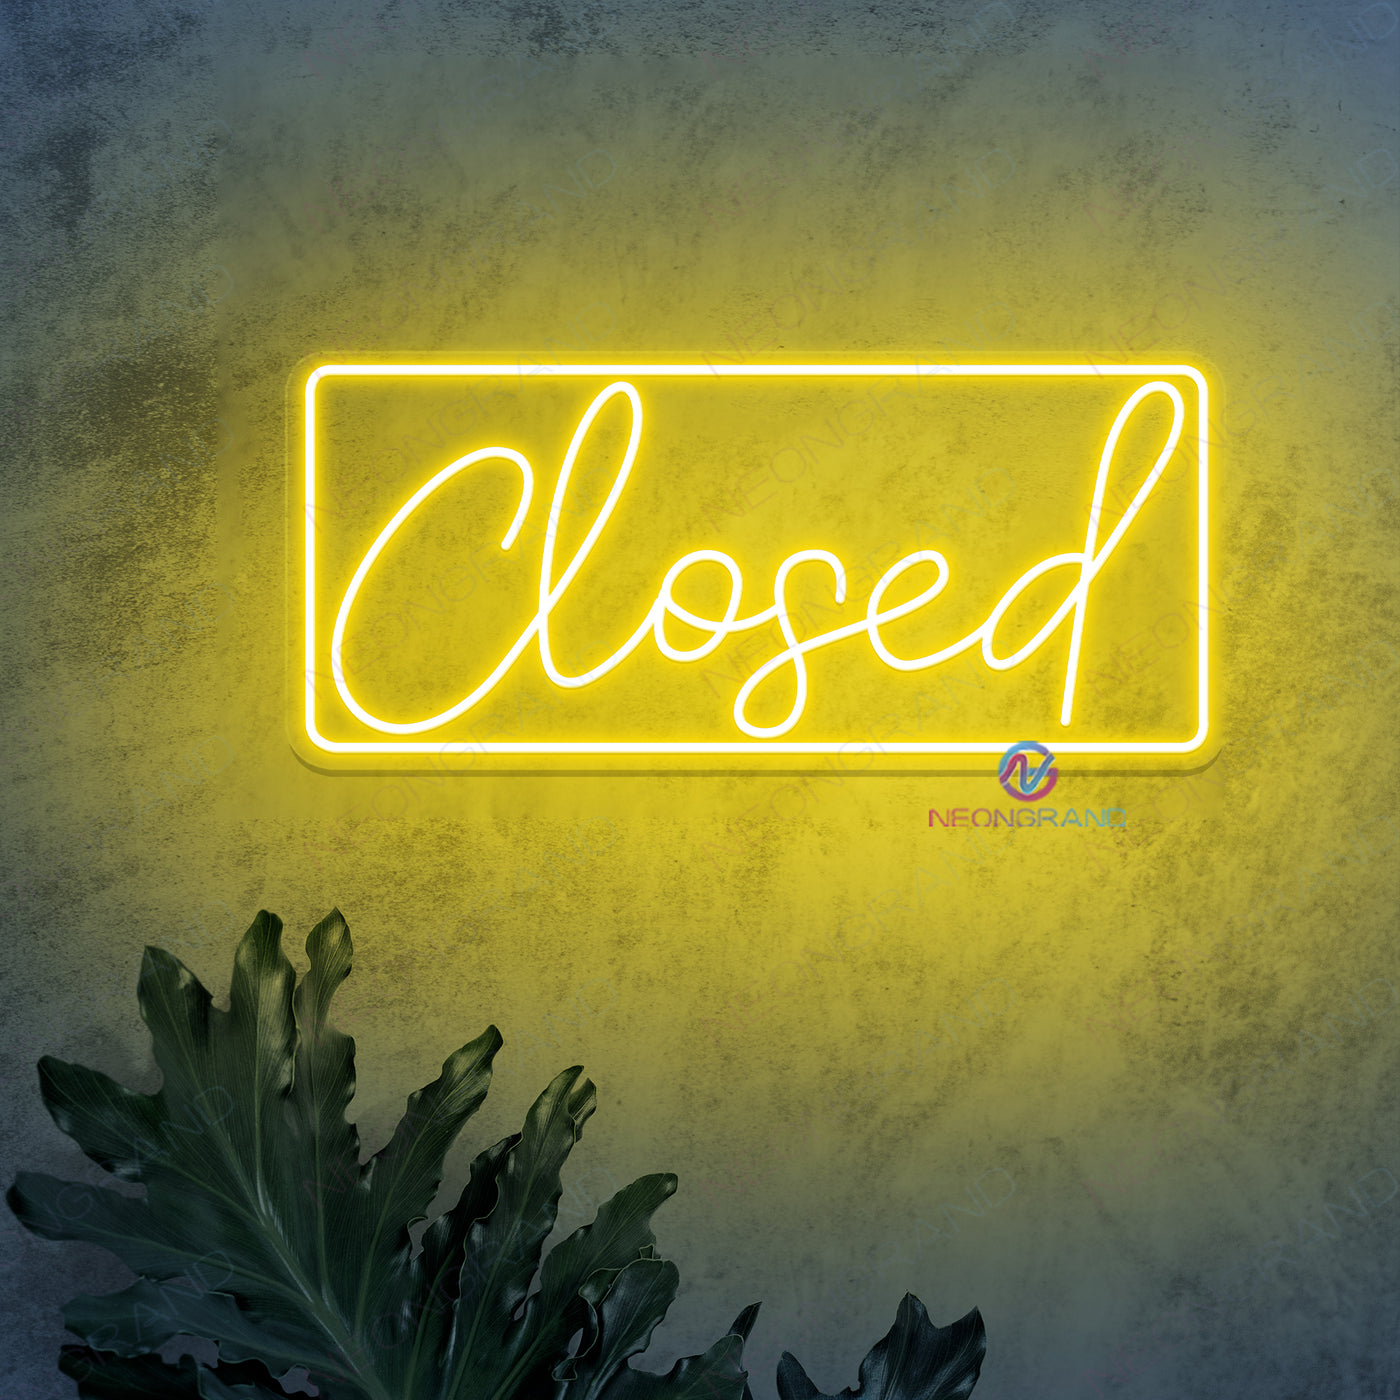 Closed Neon Sign Storefront Led Light